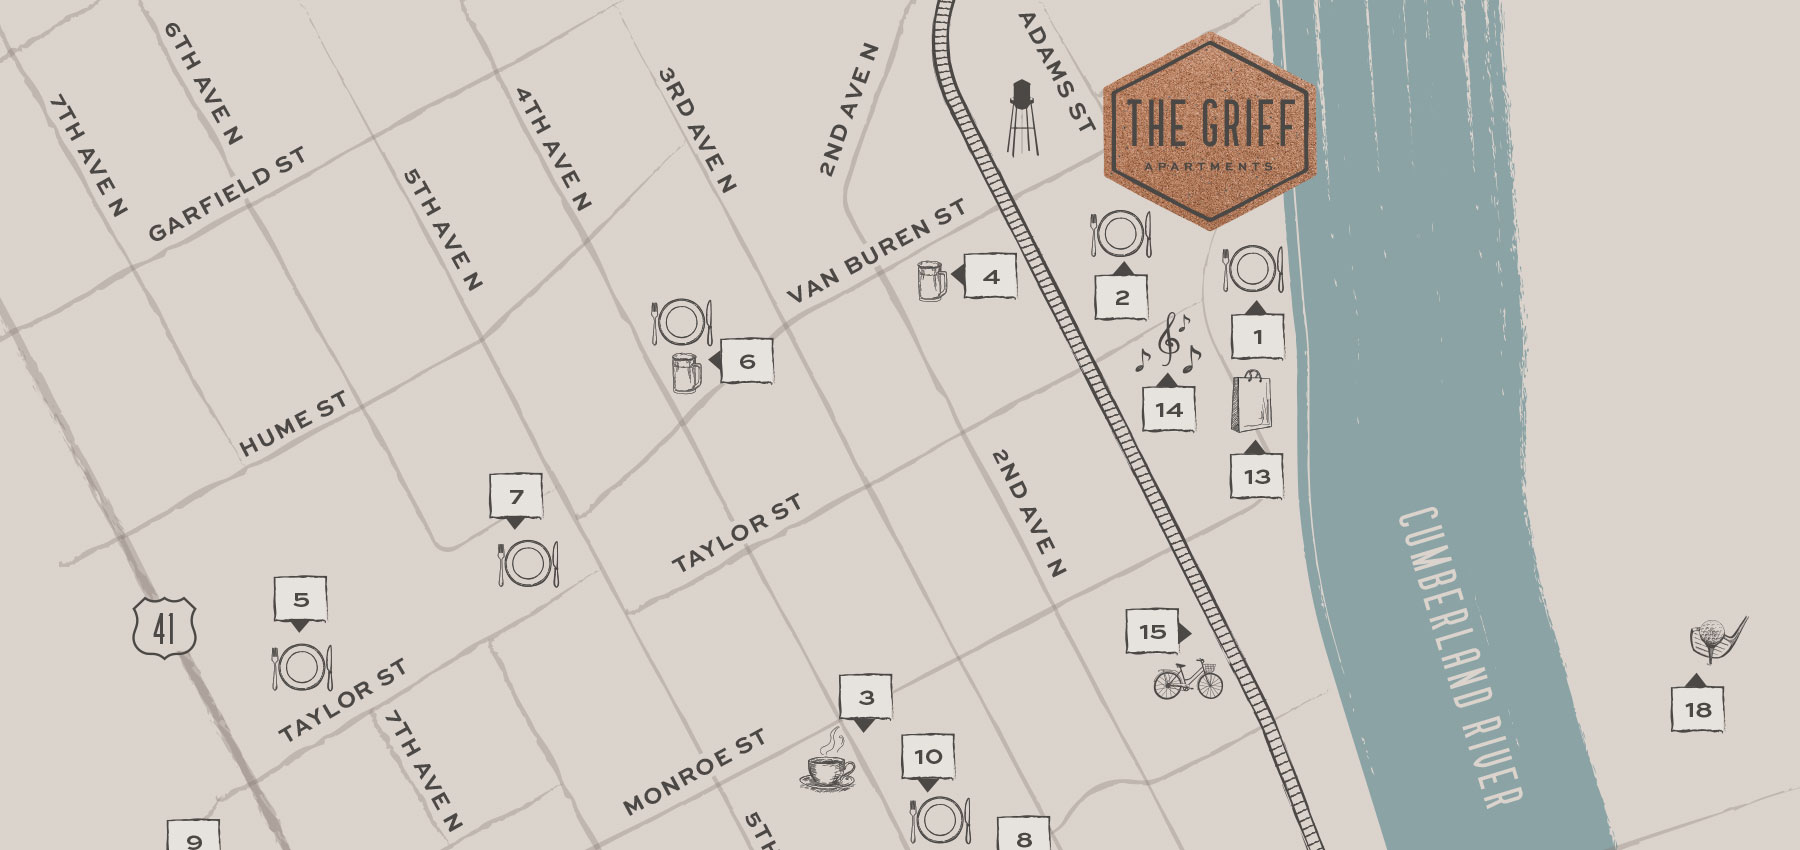 The Griff Apartments Map